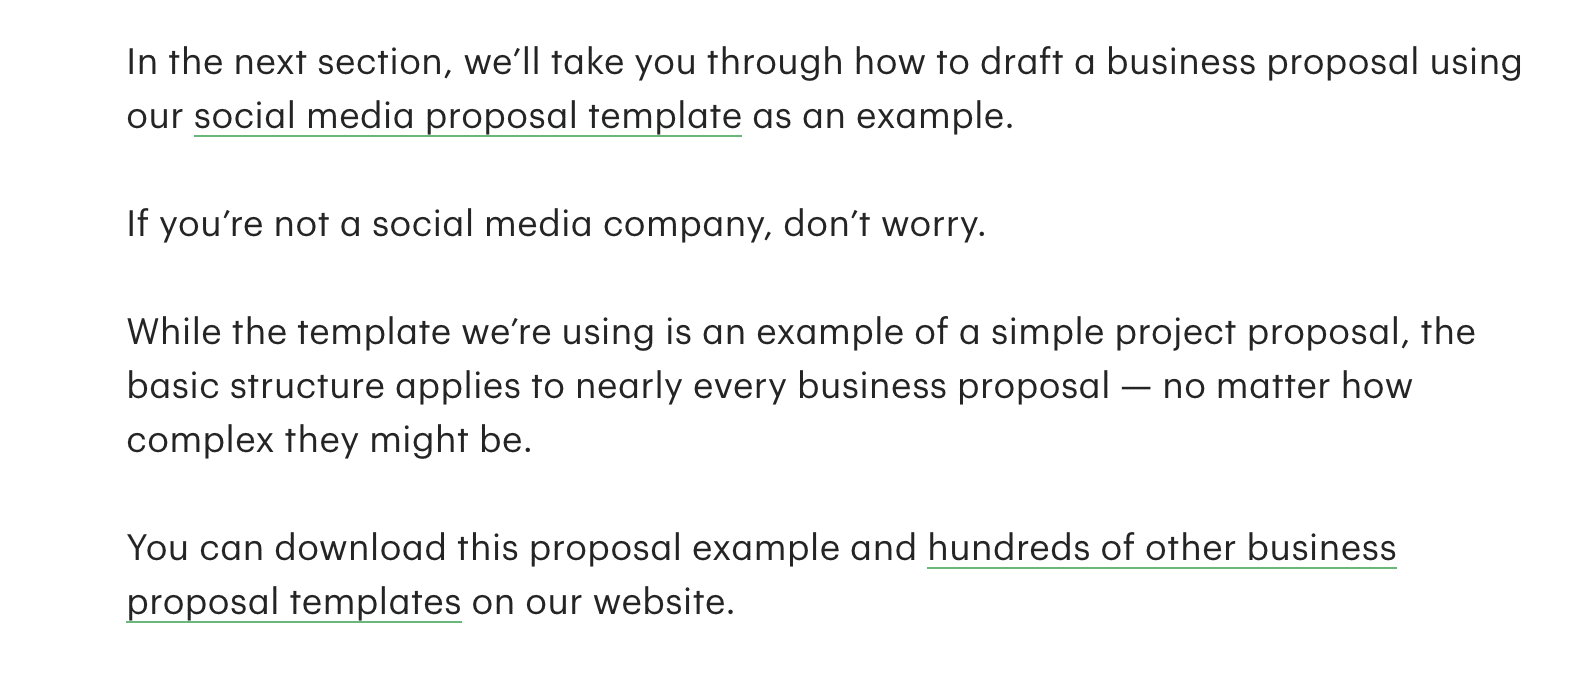 How to write a business proposal for SaaS